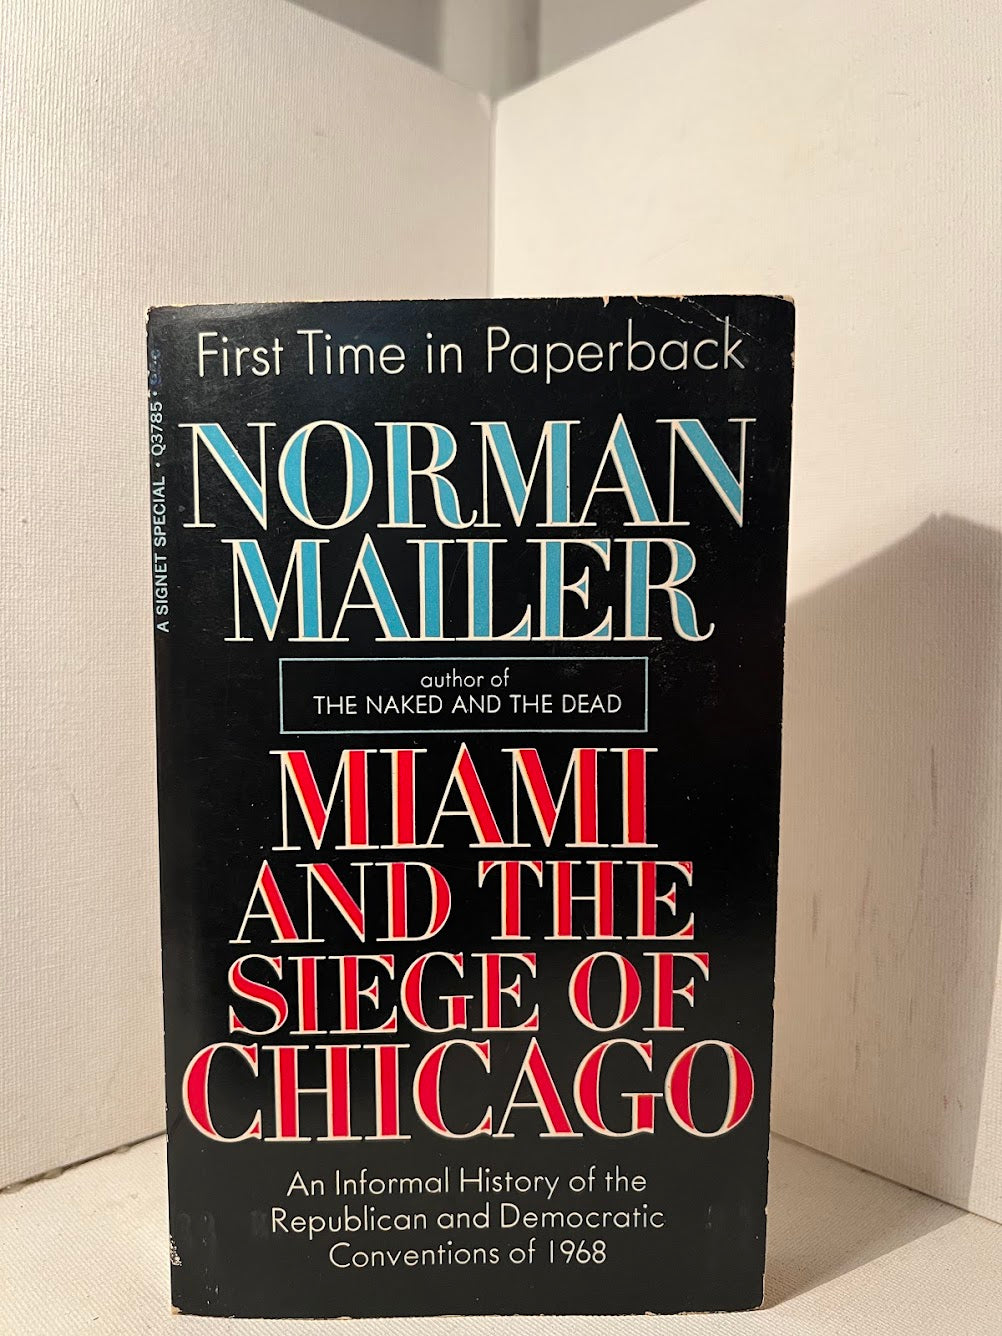 Miami and the Siege of Chicago by Norman Mailer